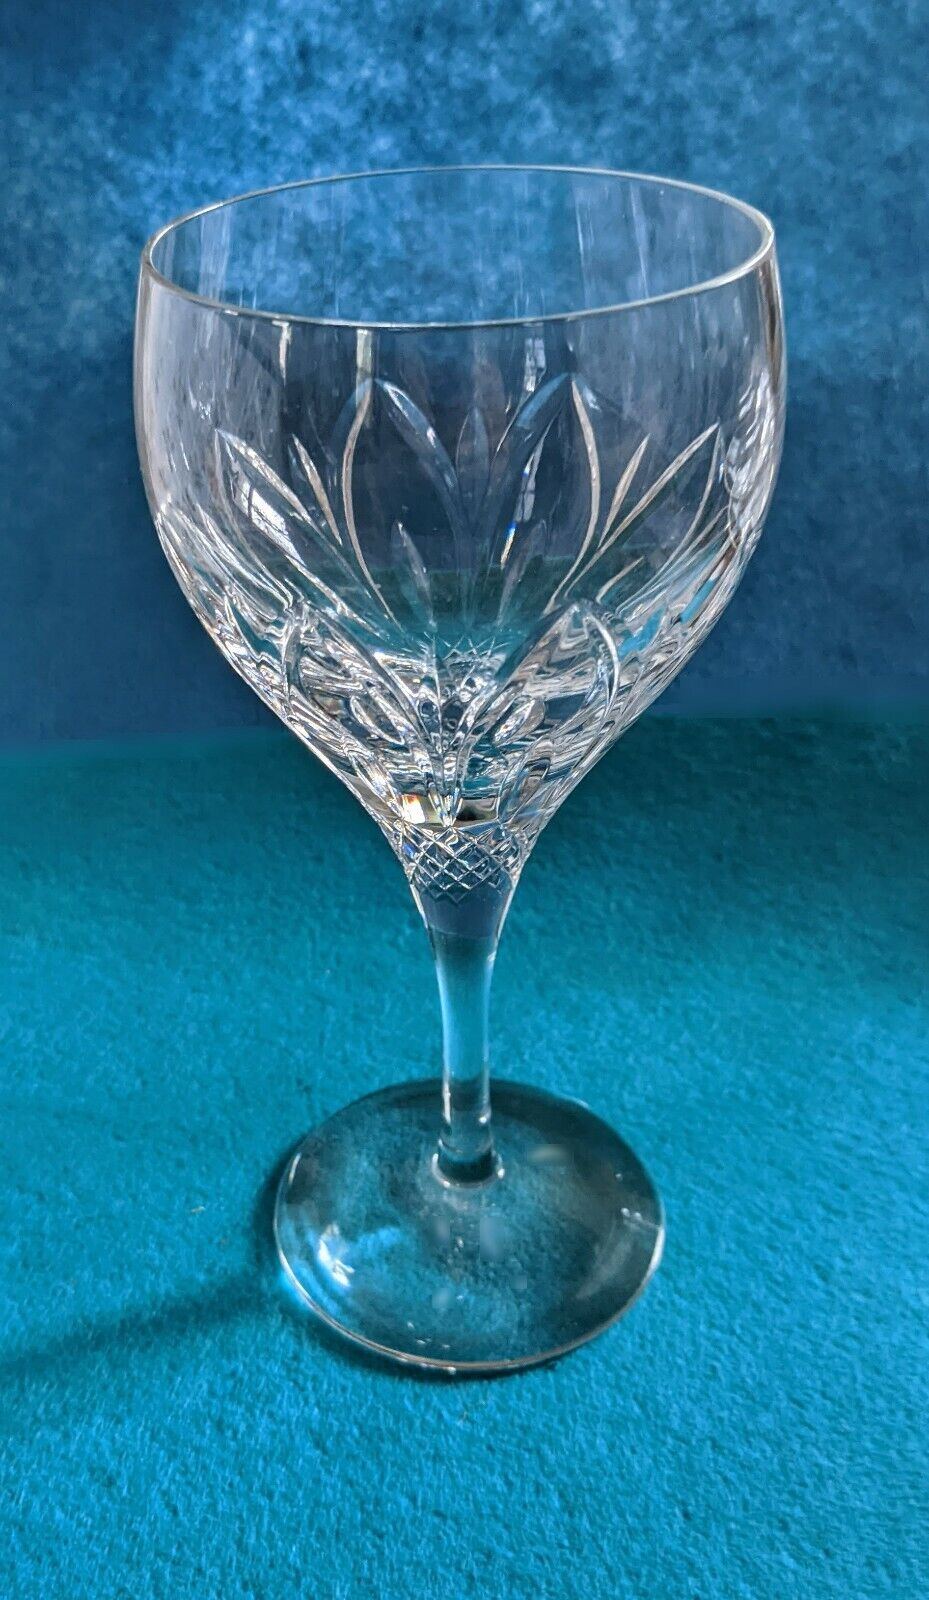 Atlantis Chartres Water Glass Goblet - 10 to sell